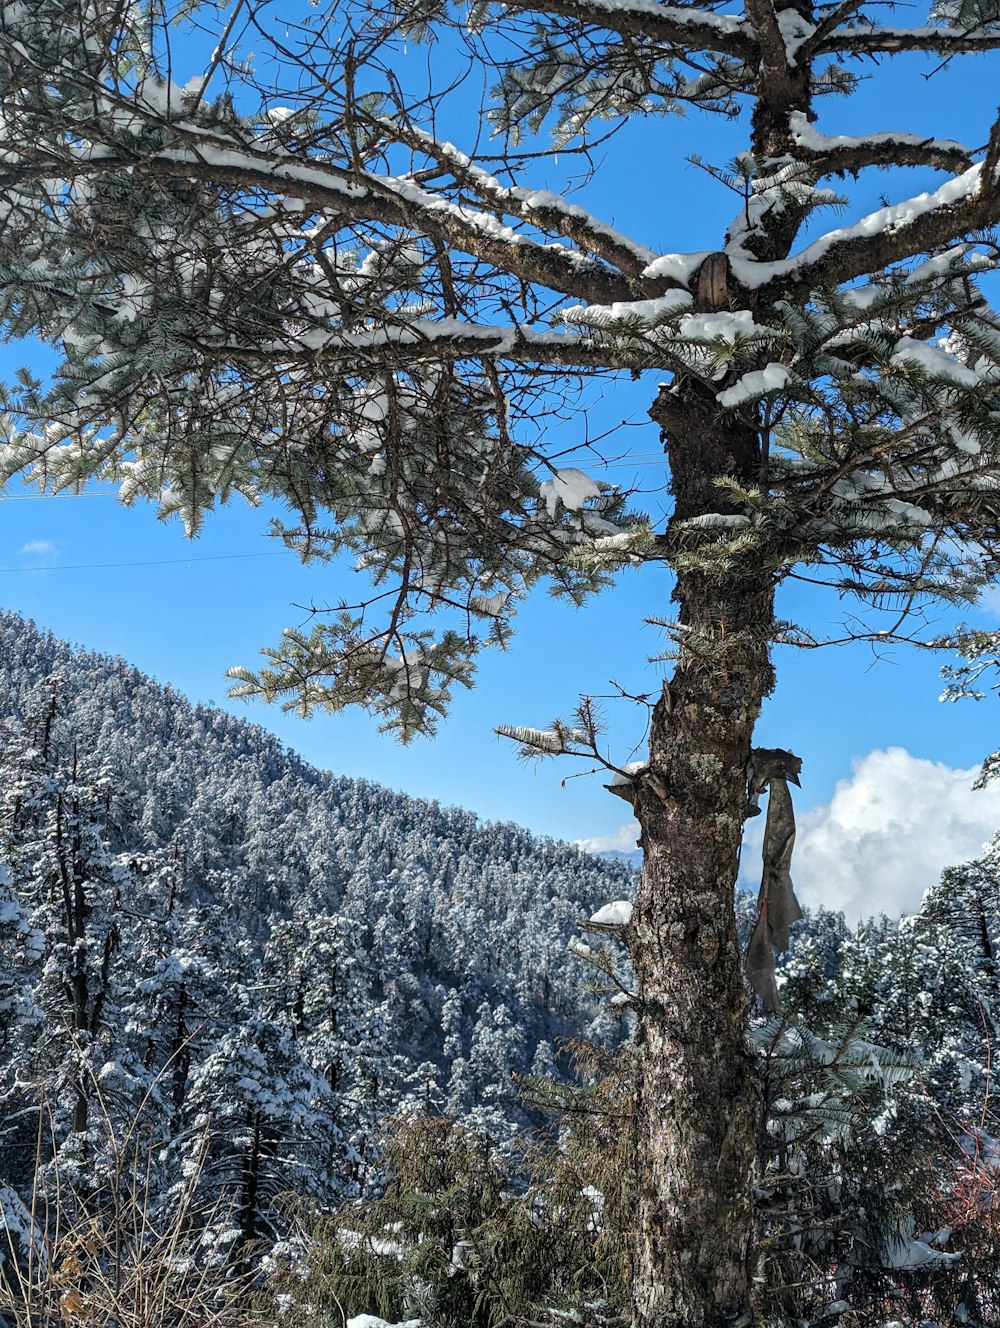 a view of a snowy mountain with a tree in the foreground